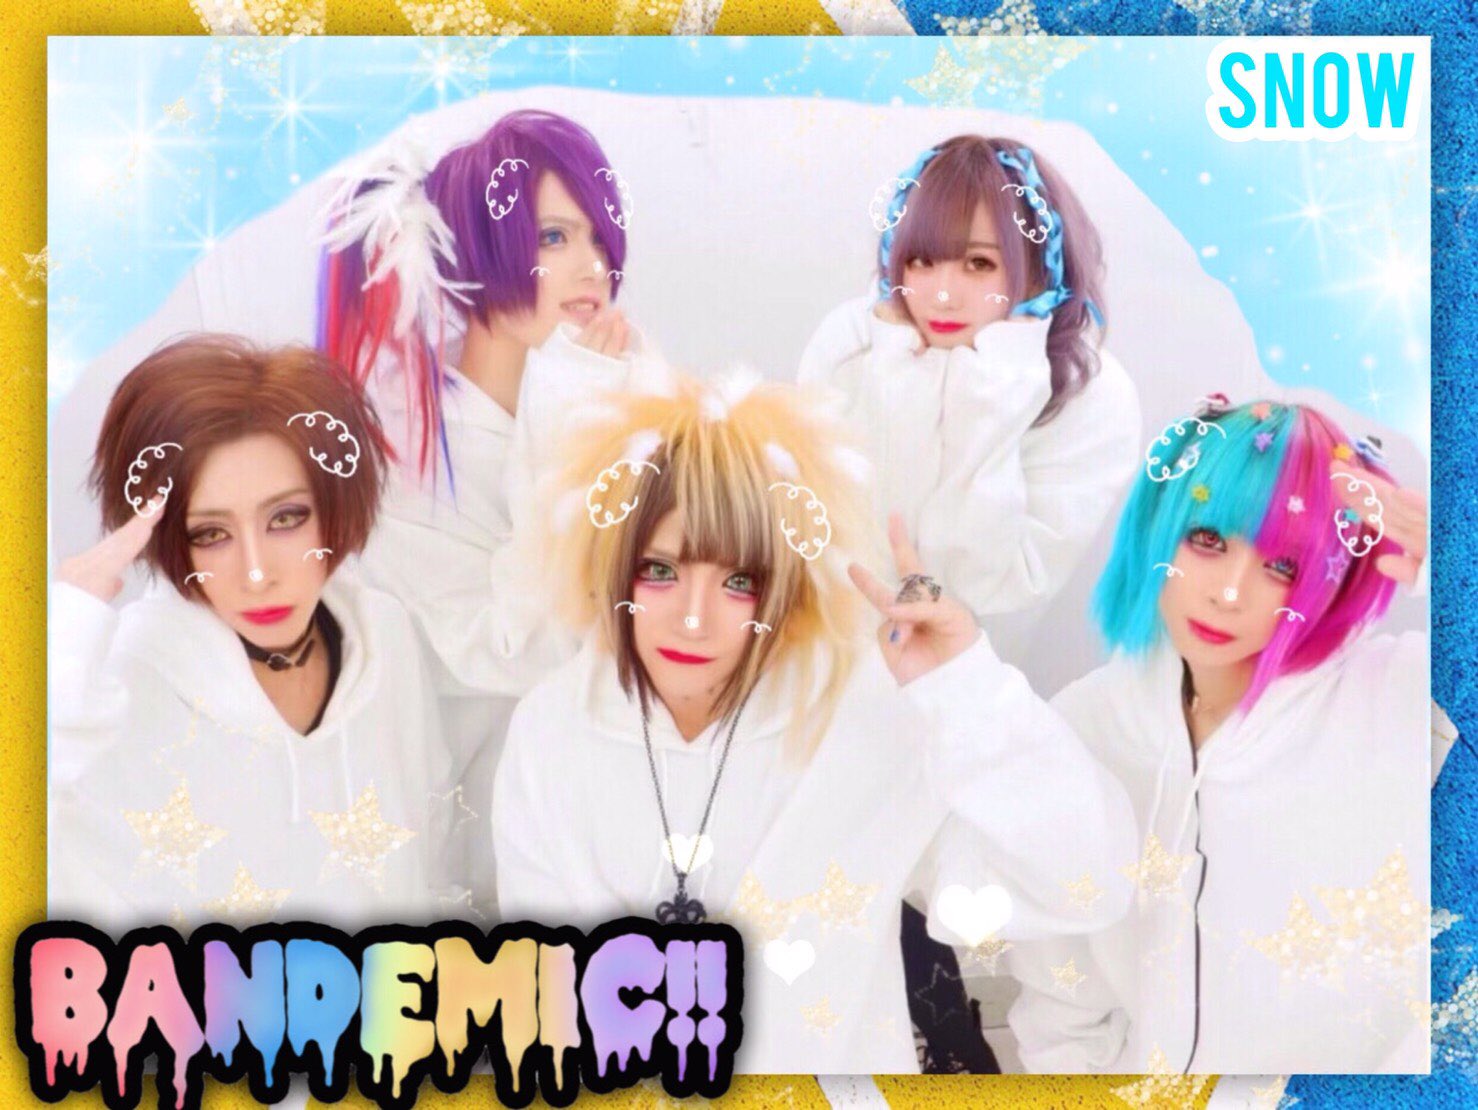 BANDEMIC!! – New look